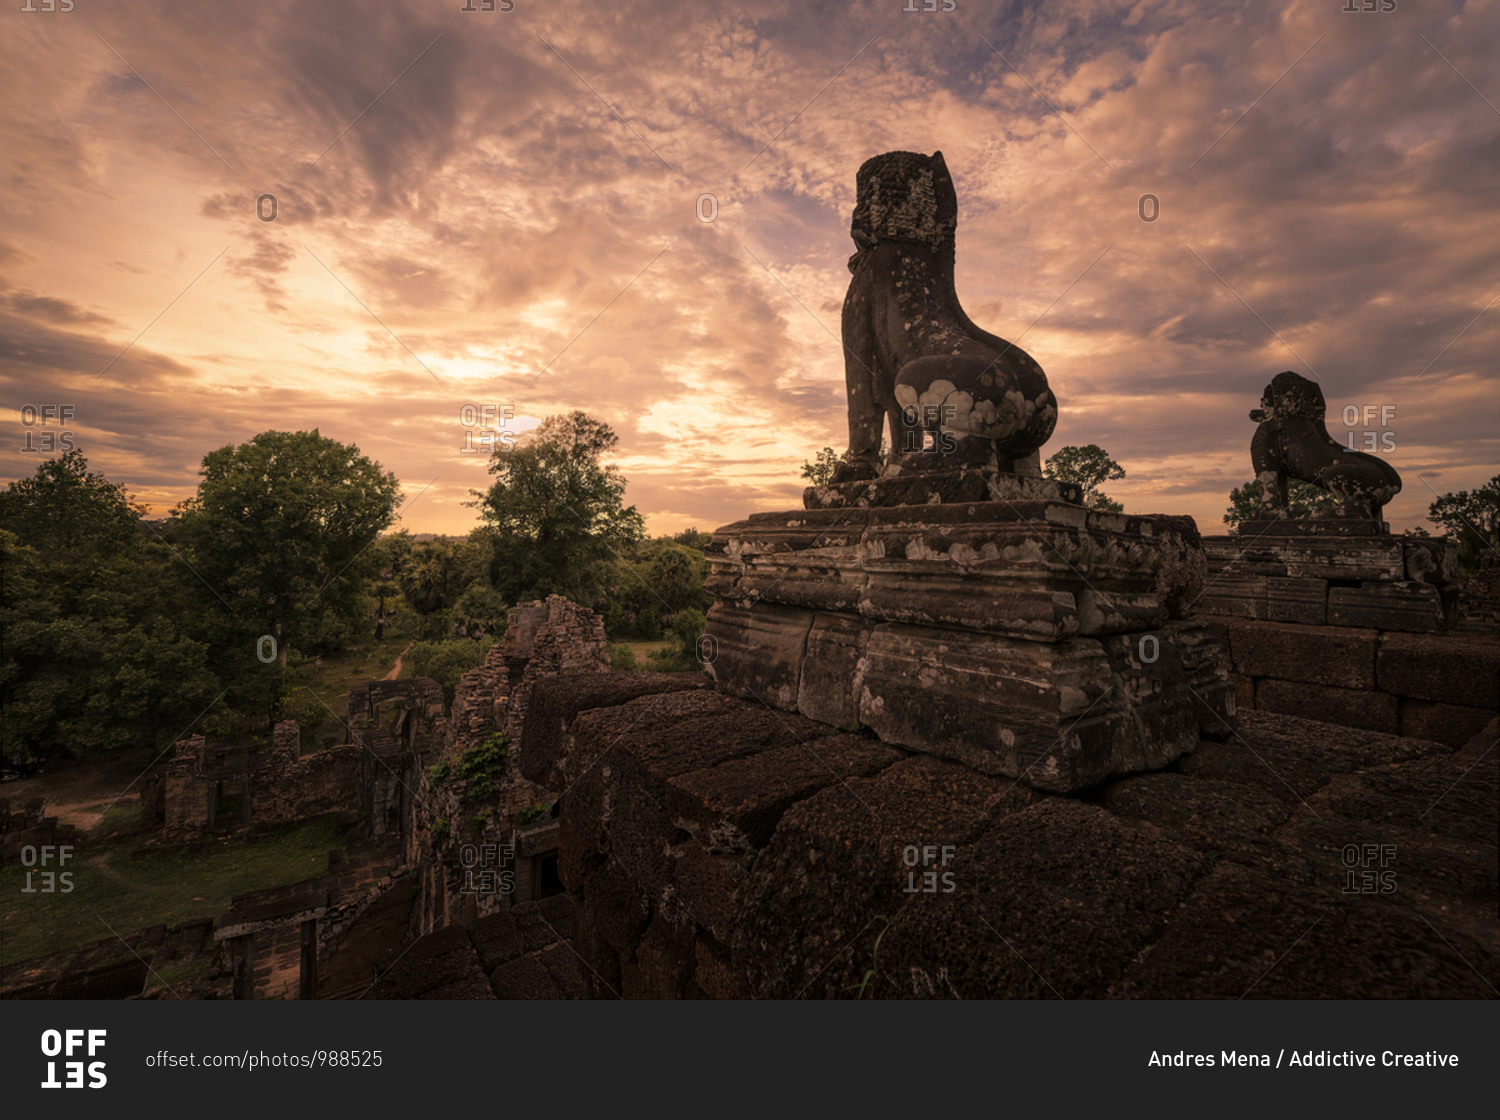 Spectacular scenery of traditional Buddhist temple with monuments of animals on background of magnificent sundown in Cambodia